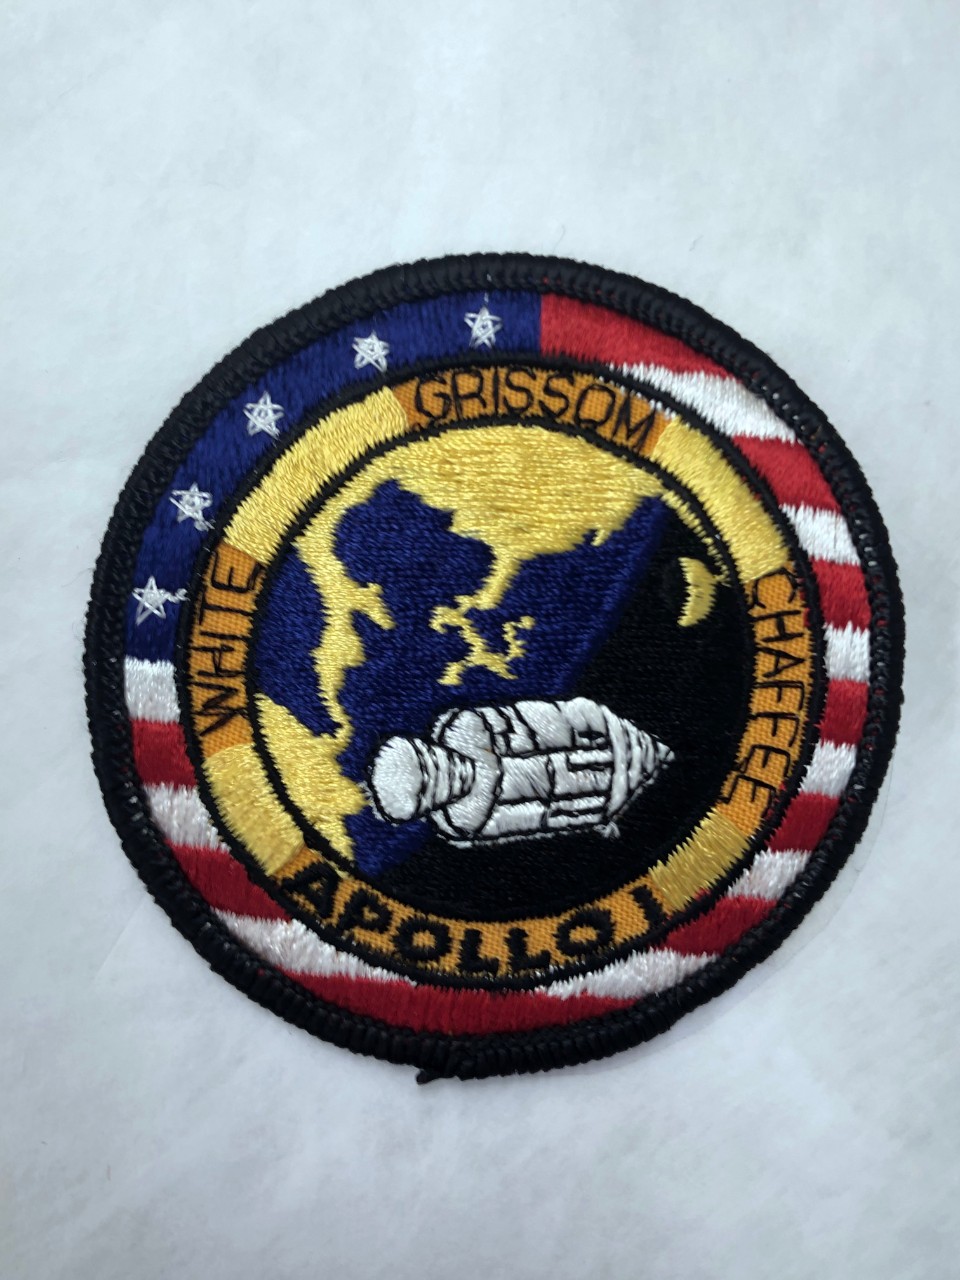 Roger Chaffee Apollo 1 Patch  L2019-02-A.   Courtesy of the Grand Rapids Pubic Museum